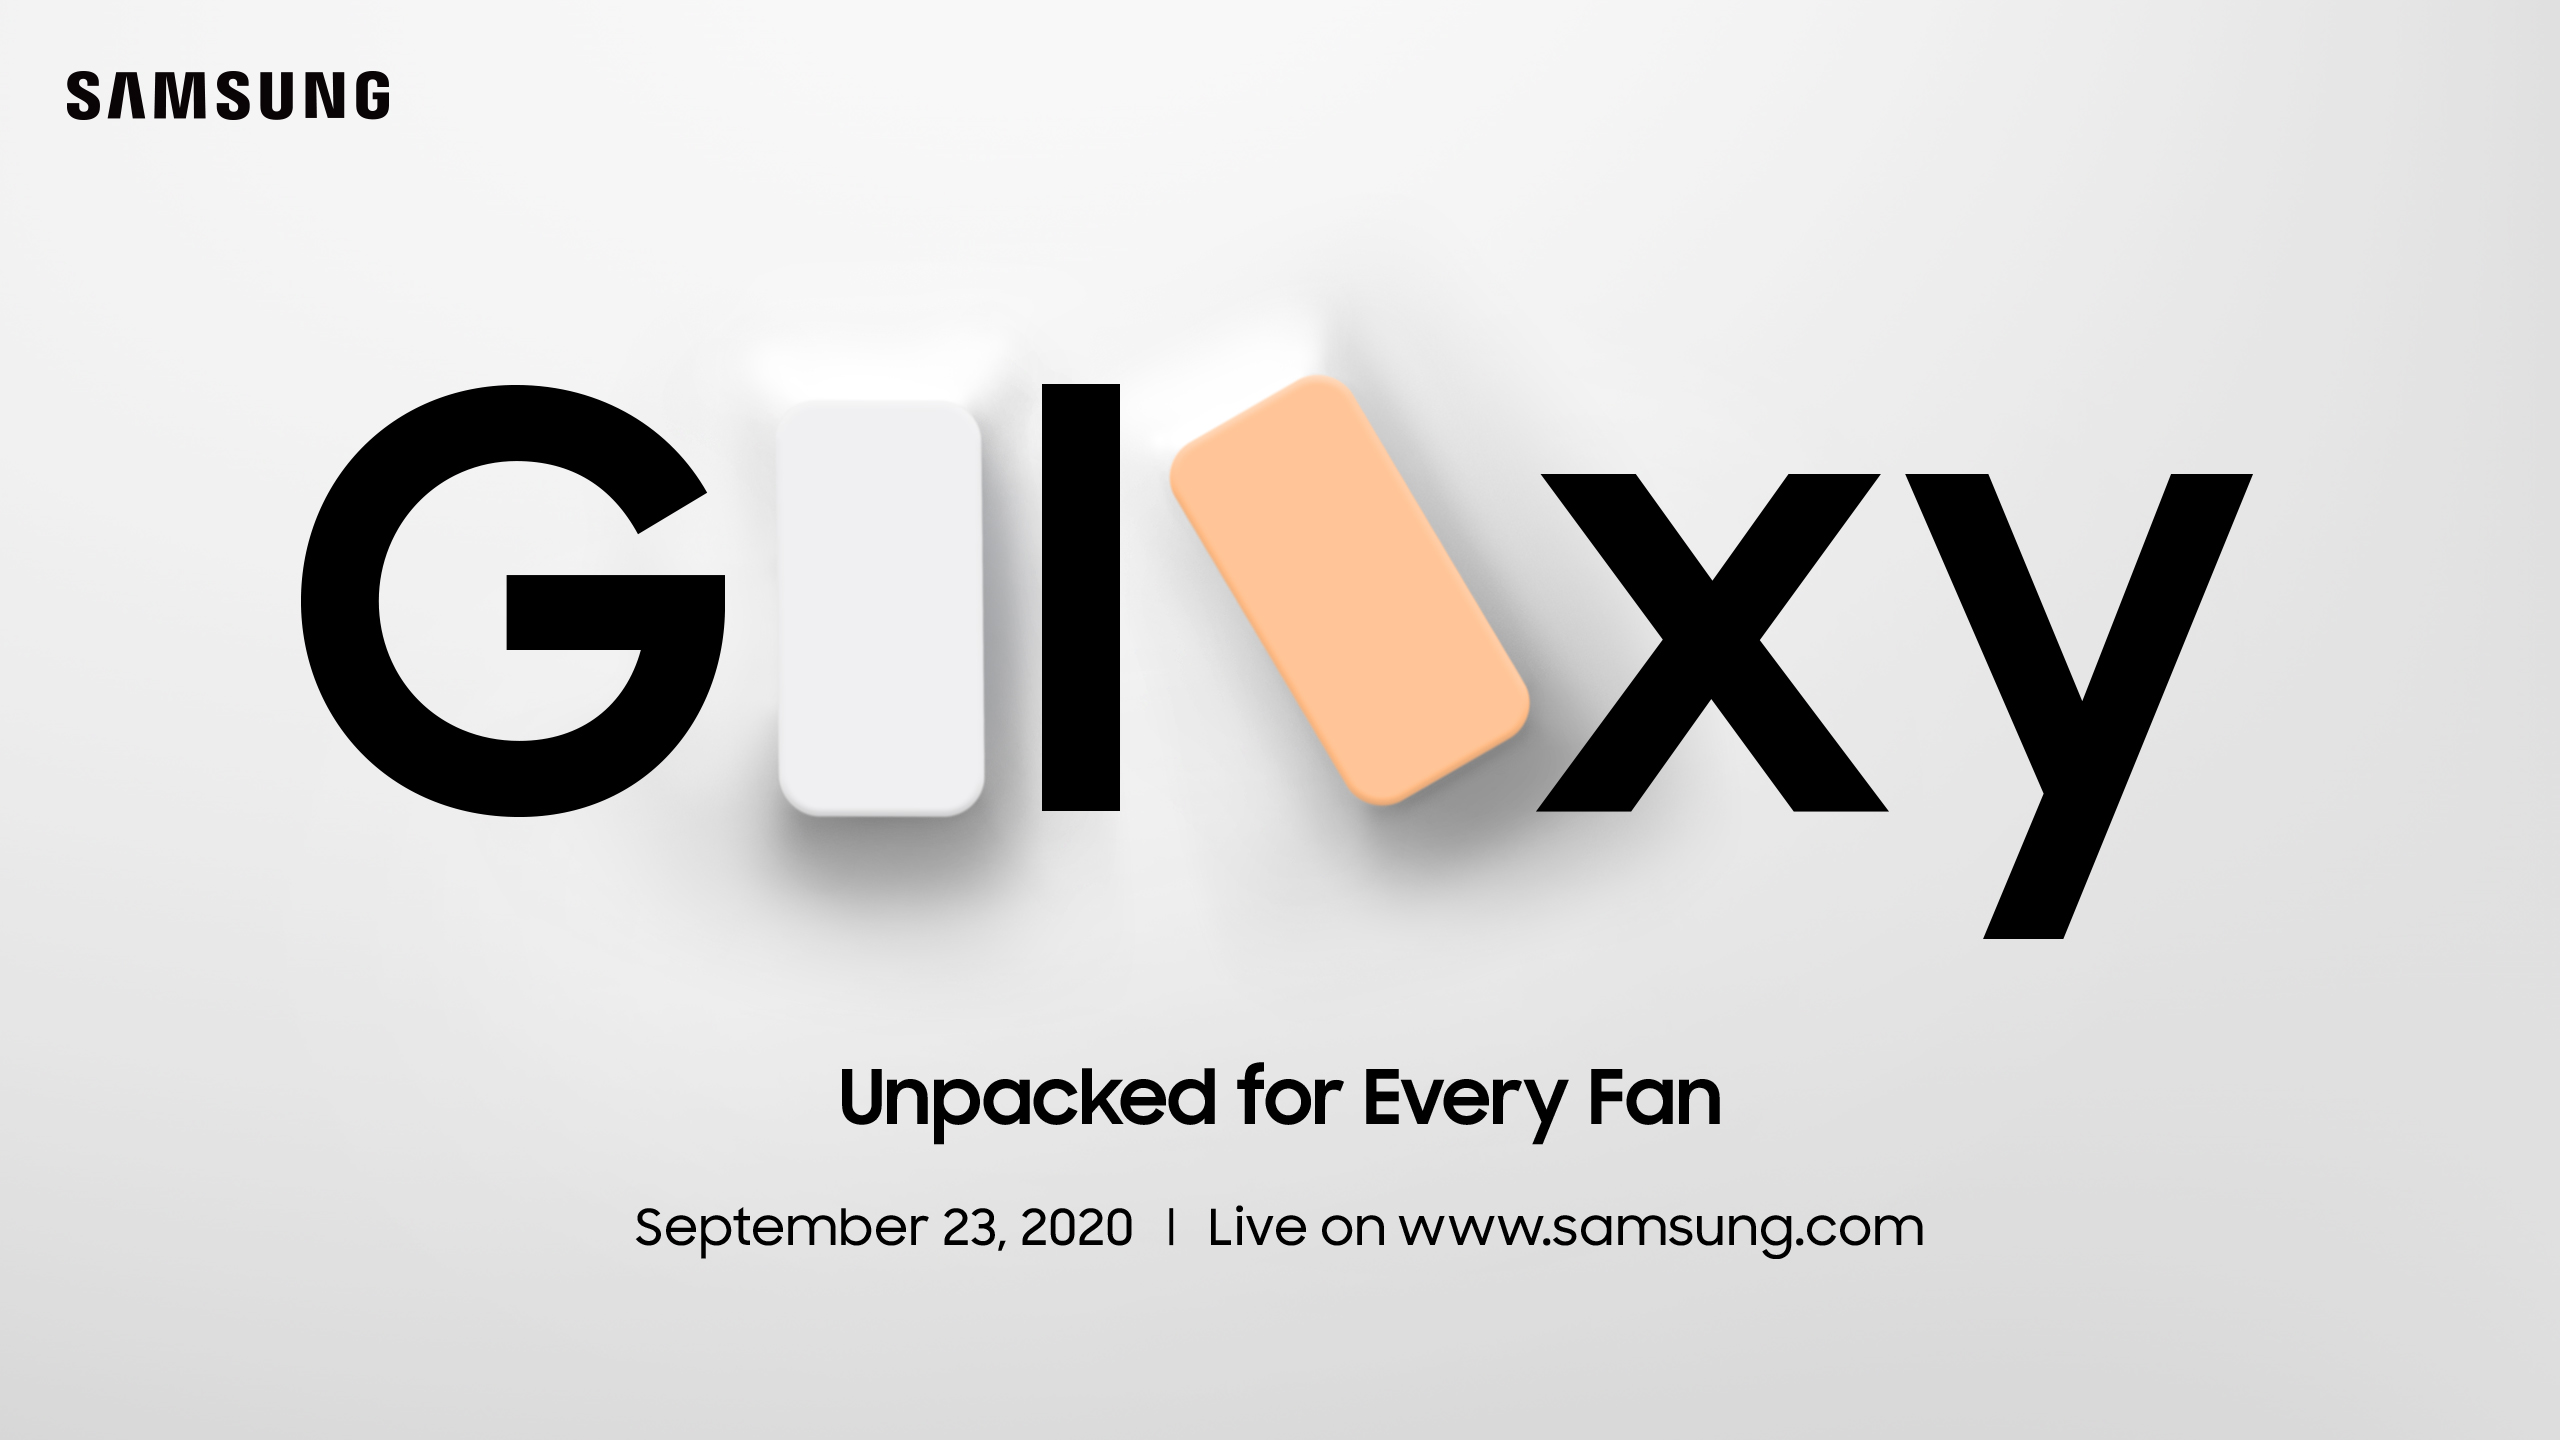 Galaxy unpacked for everyone invitation with white and orange